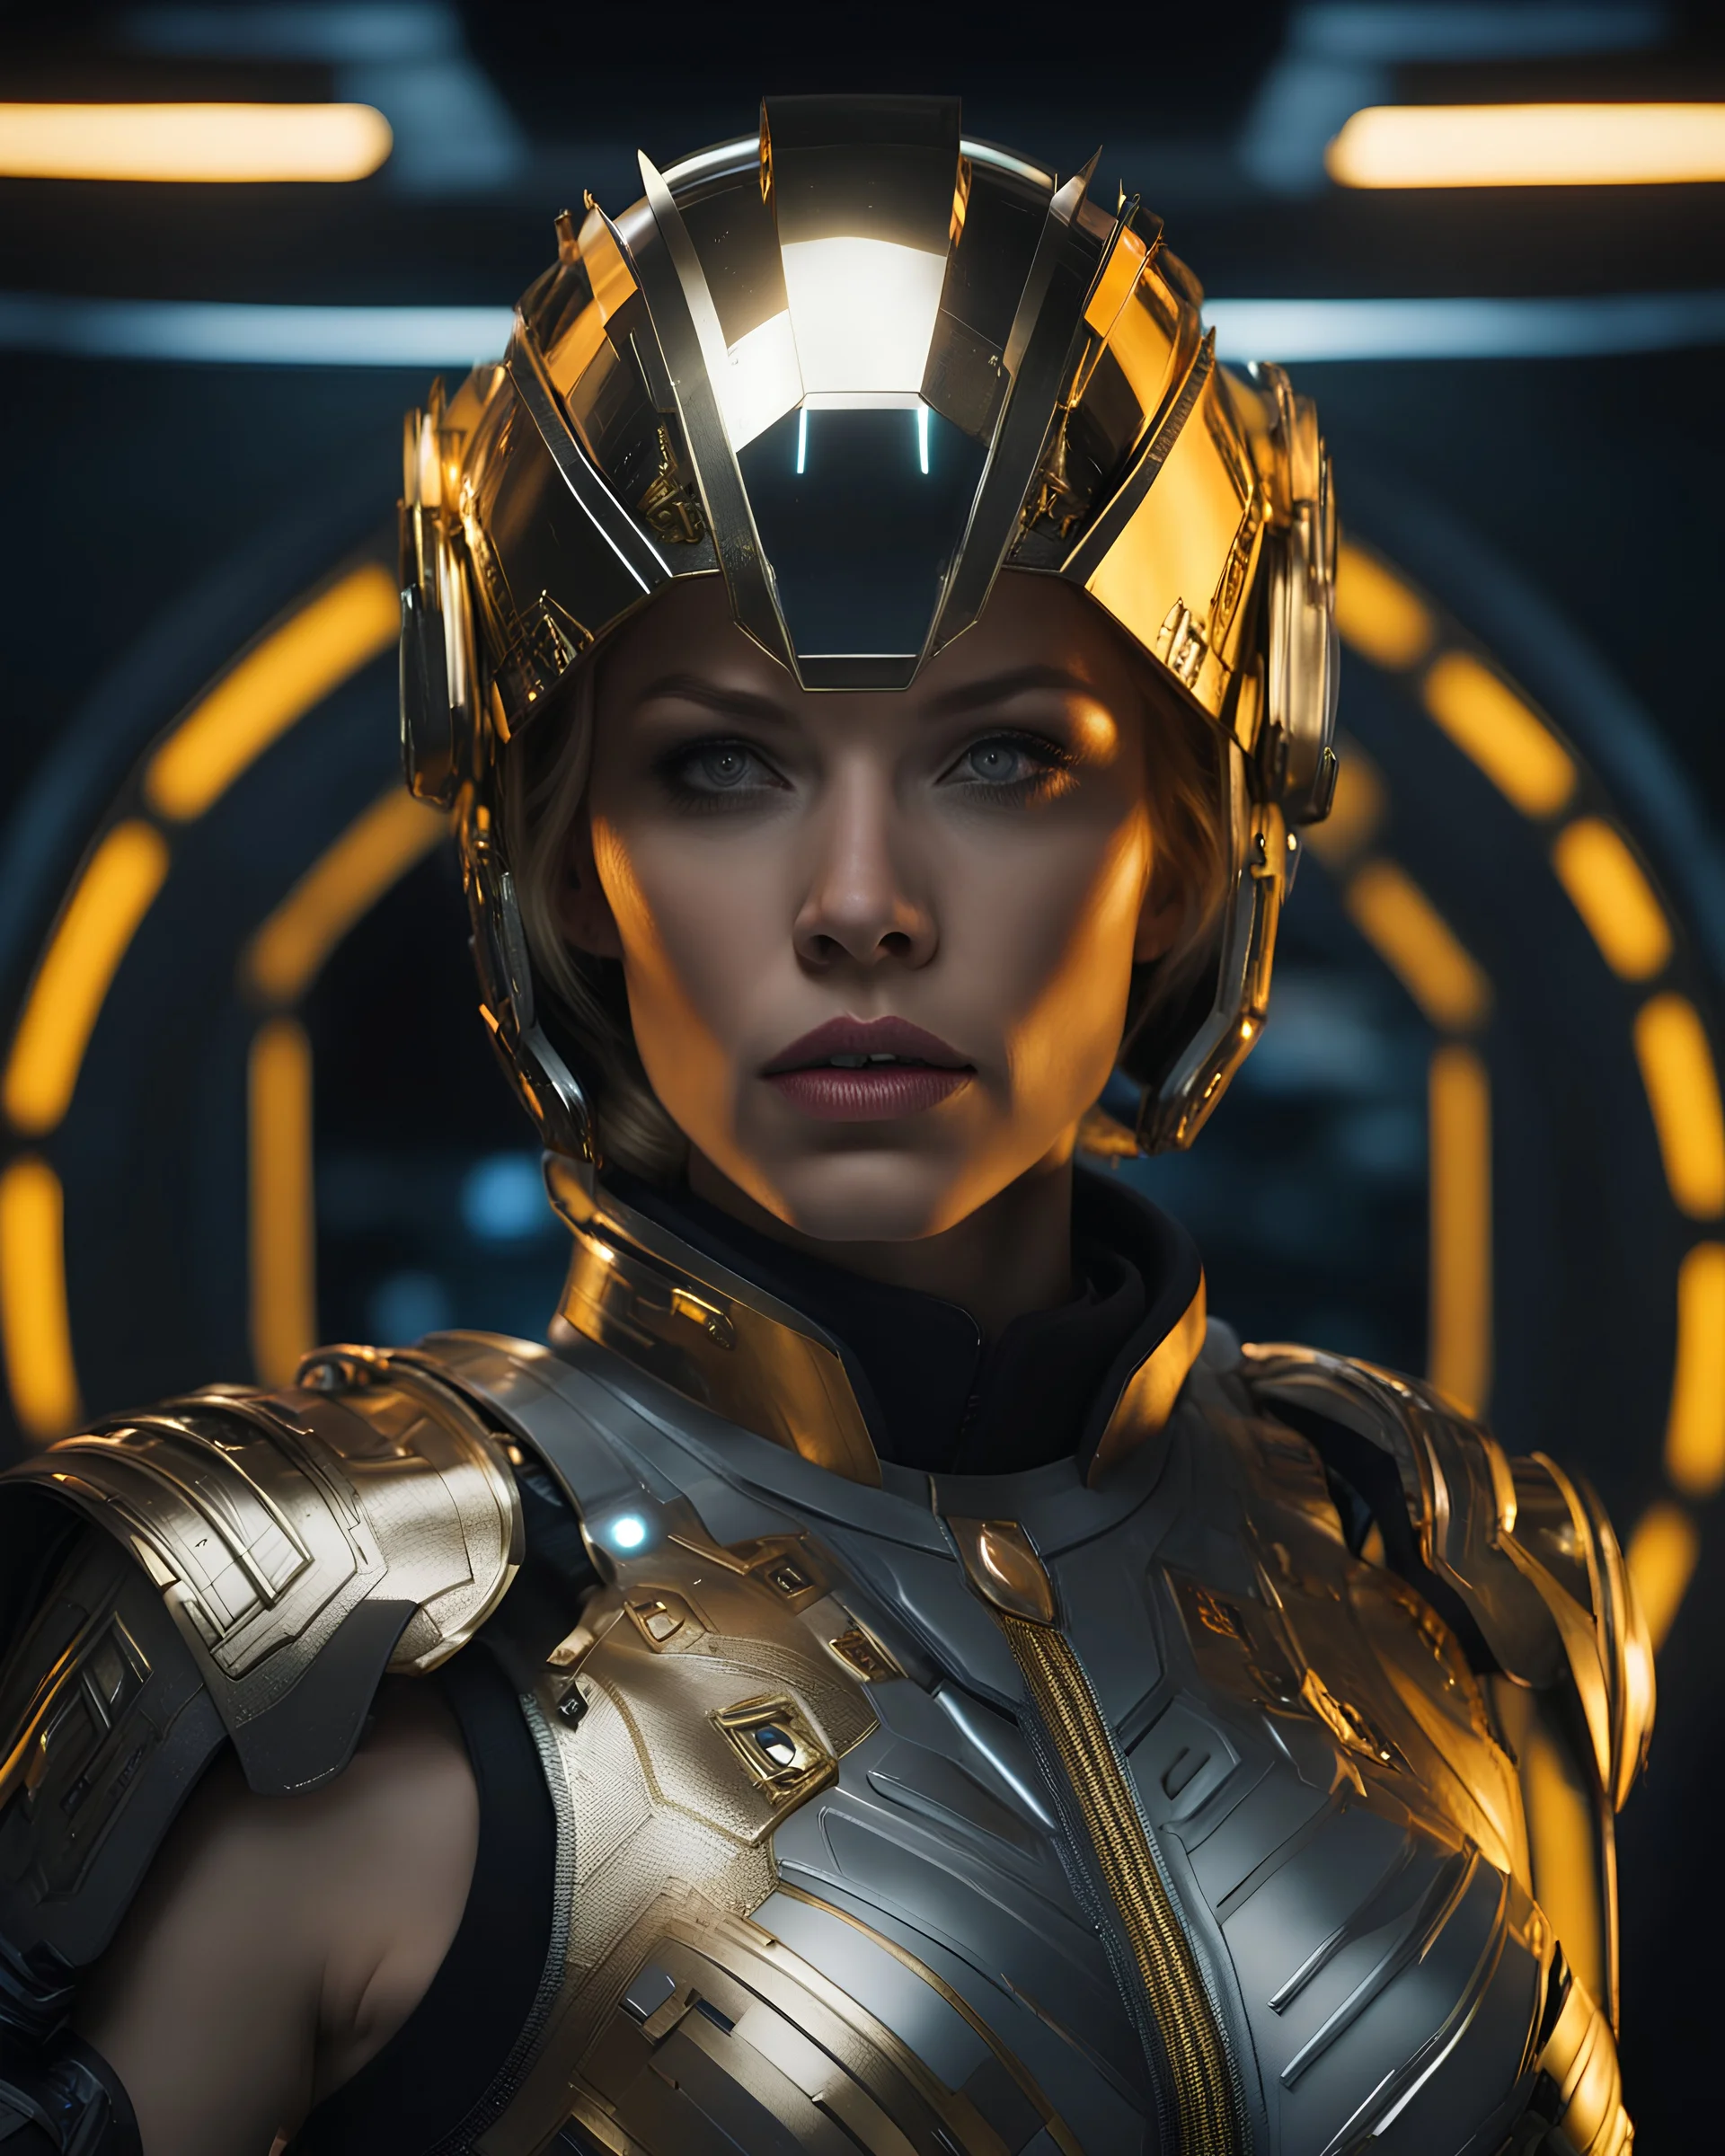 Katheryn winnick with blond hair, intense golden red eyes, wearing Cyberpunk clothes,space helm cover her face uniform with her arms made of metal, against a dark background of inside a space station at night. detailed-eyes, details-face, details-lips,LuxuriousNeons Costume, silver dress,tape_clothes,tape,upshirt